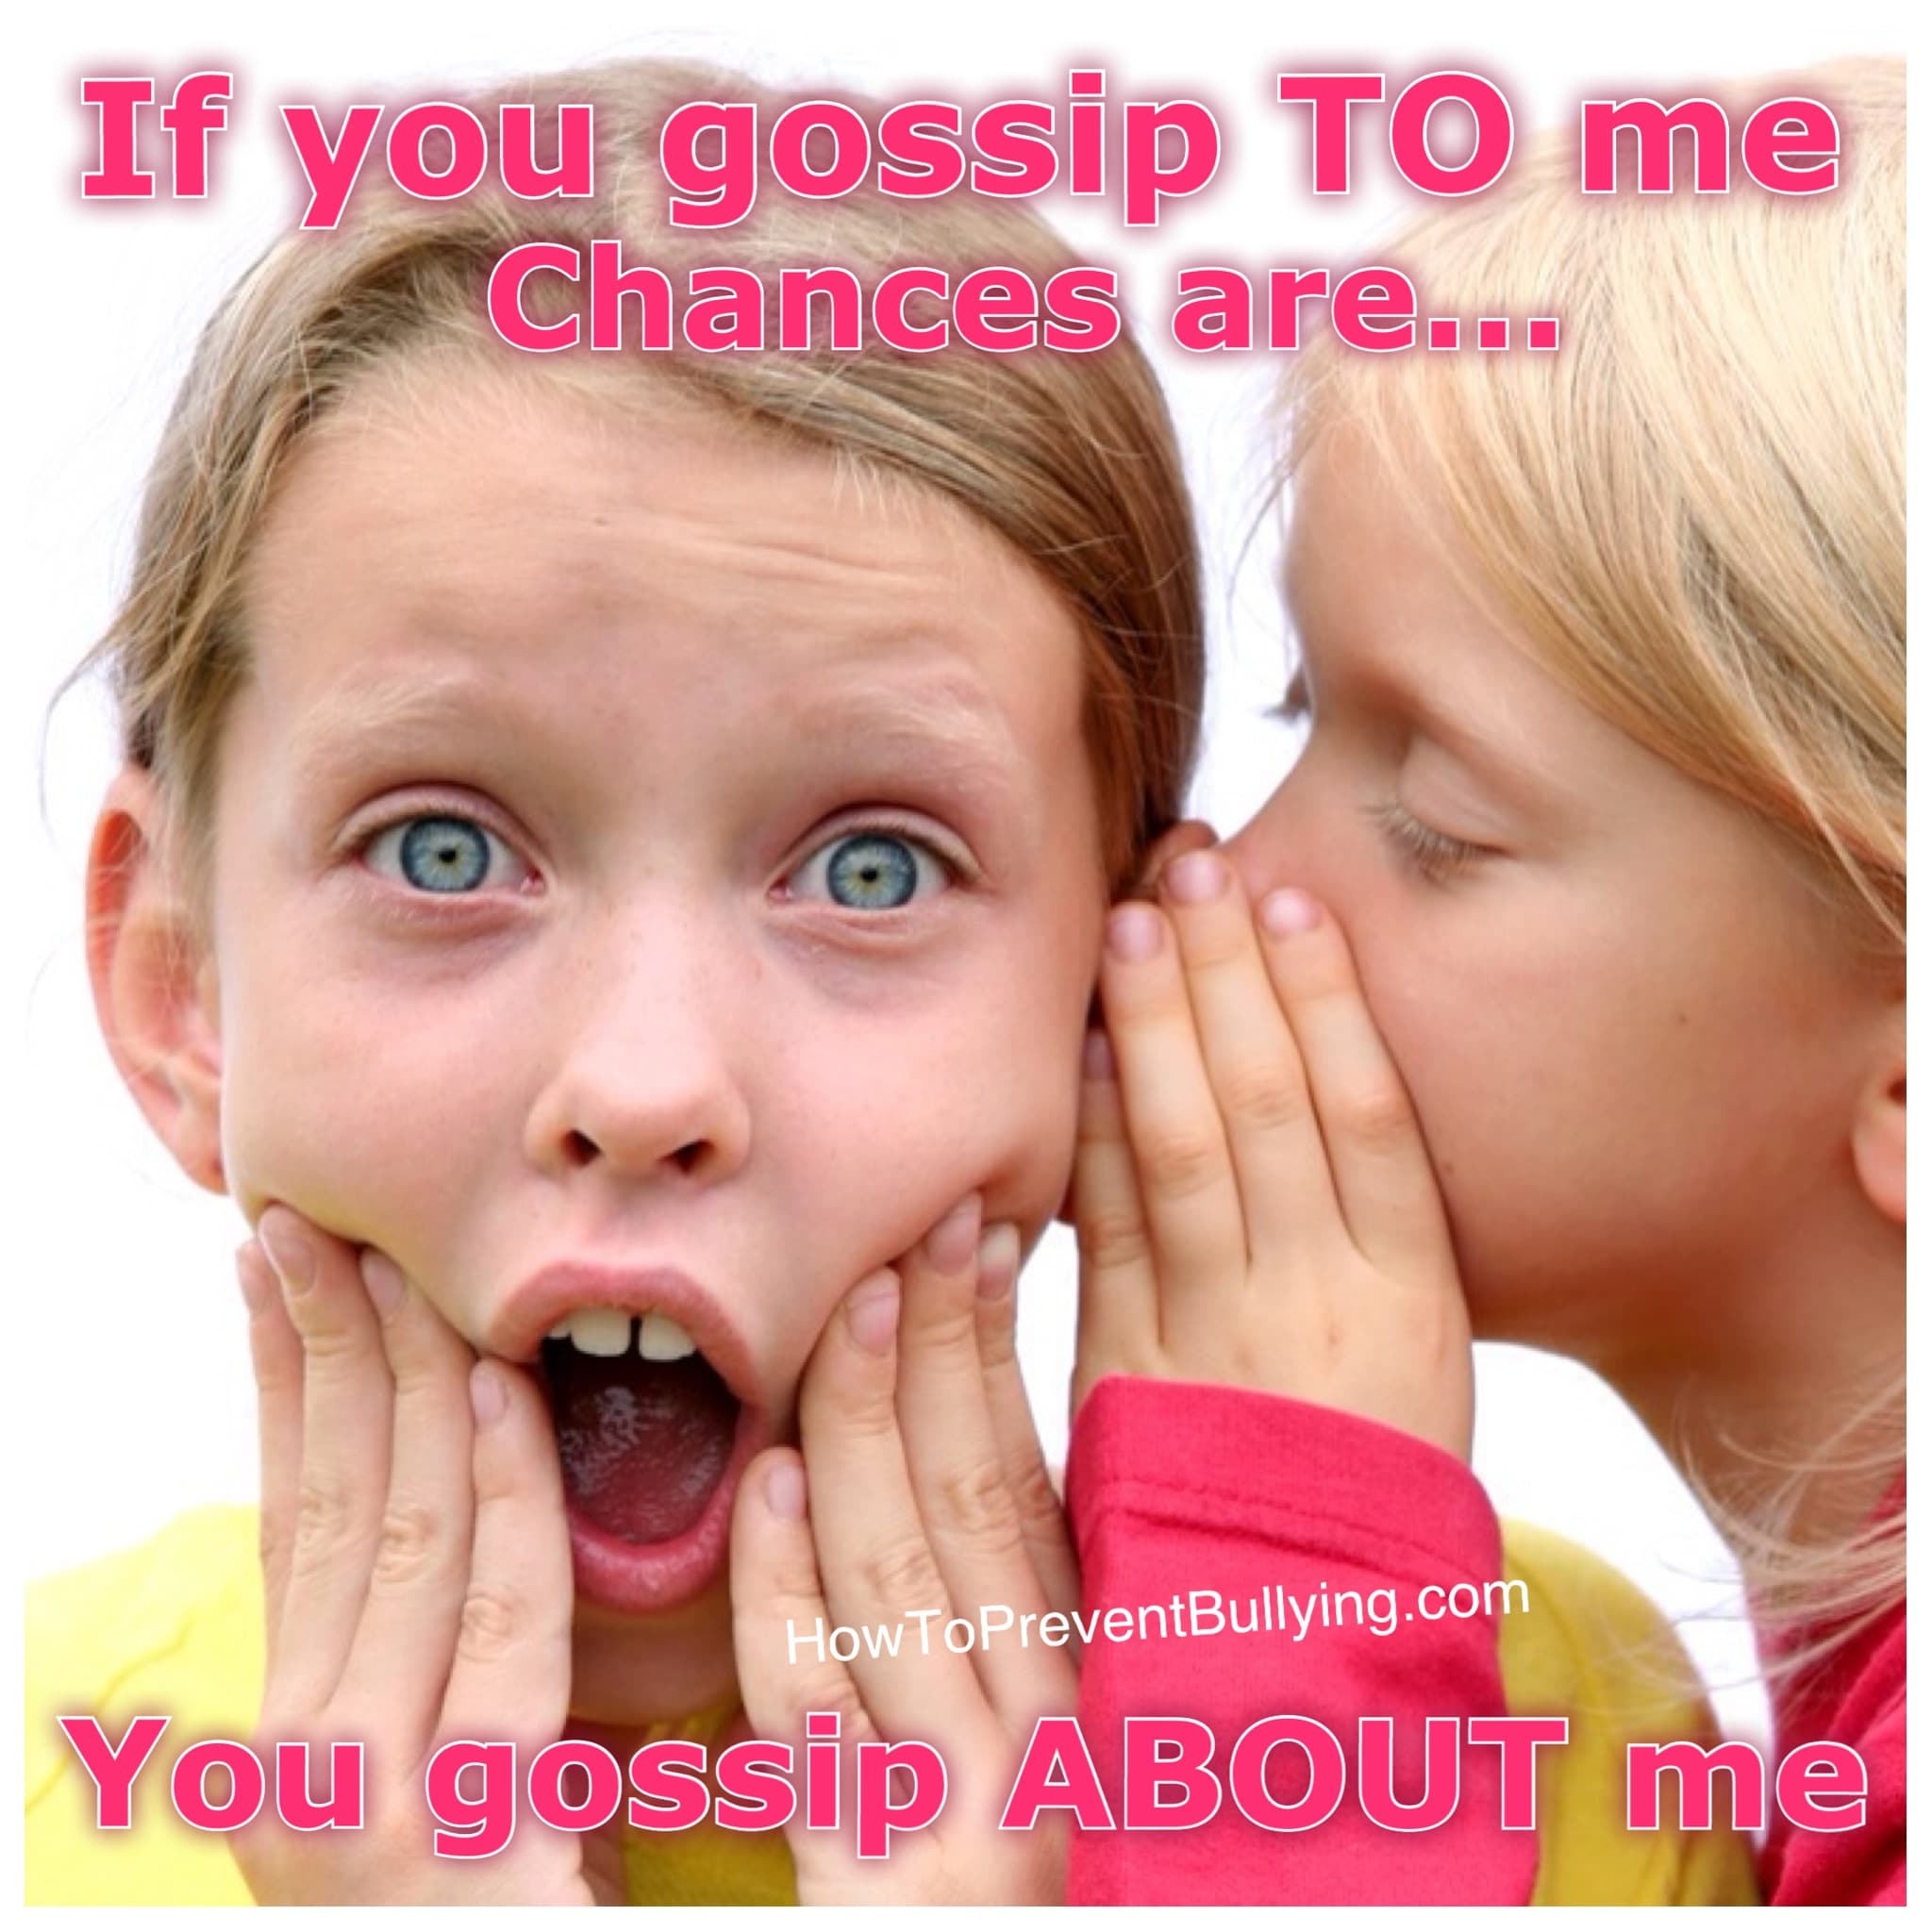 Chances are you gossip about me